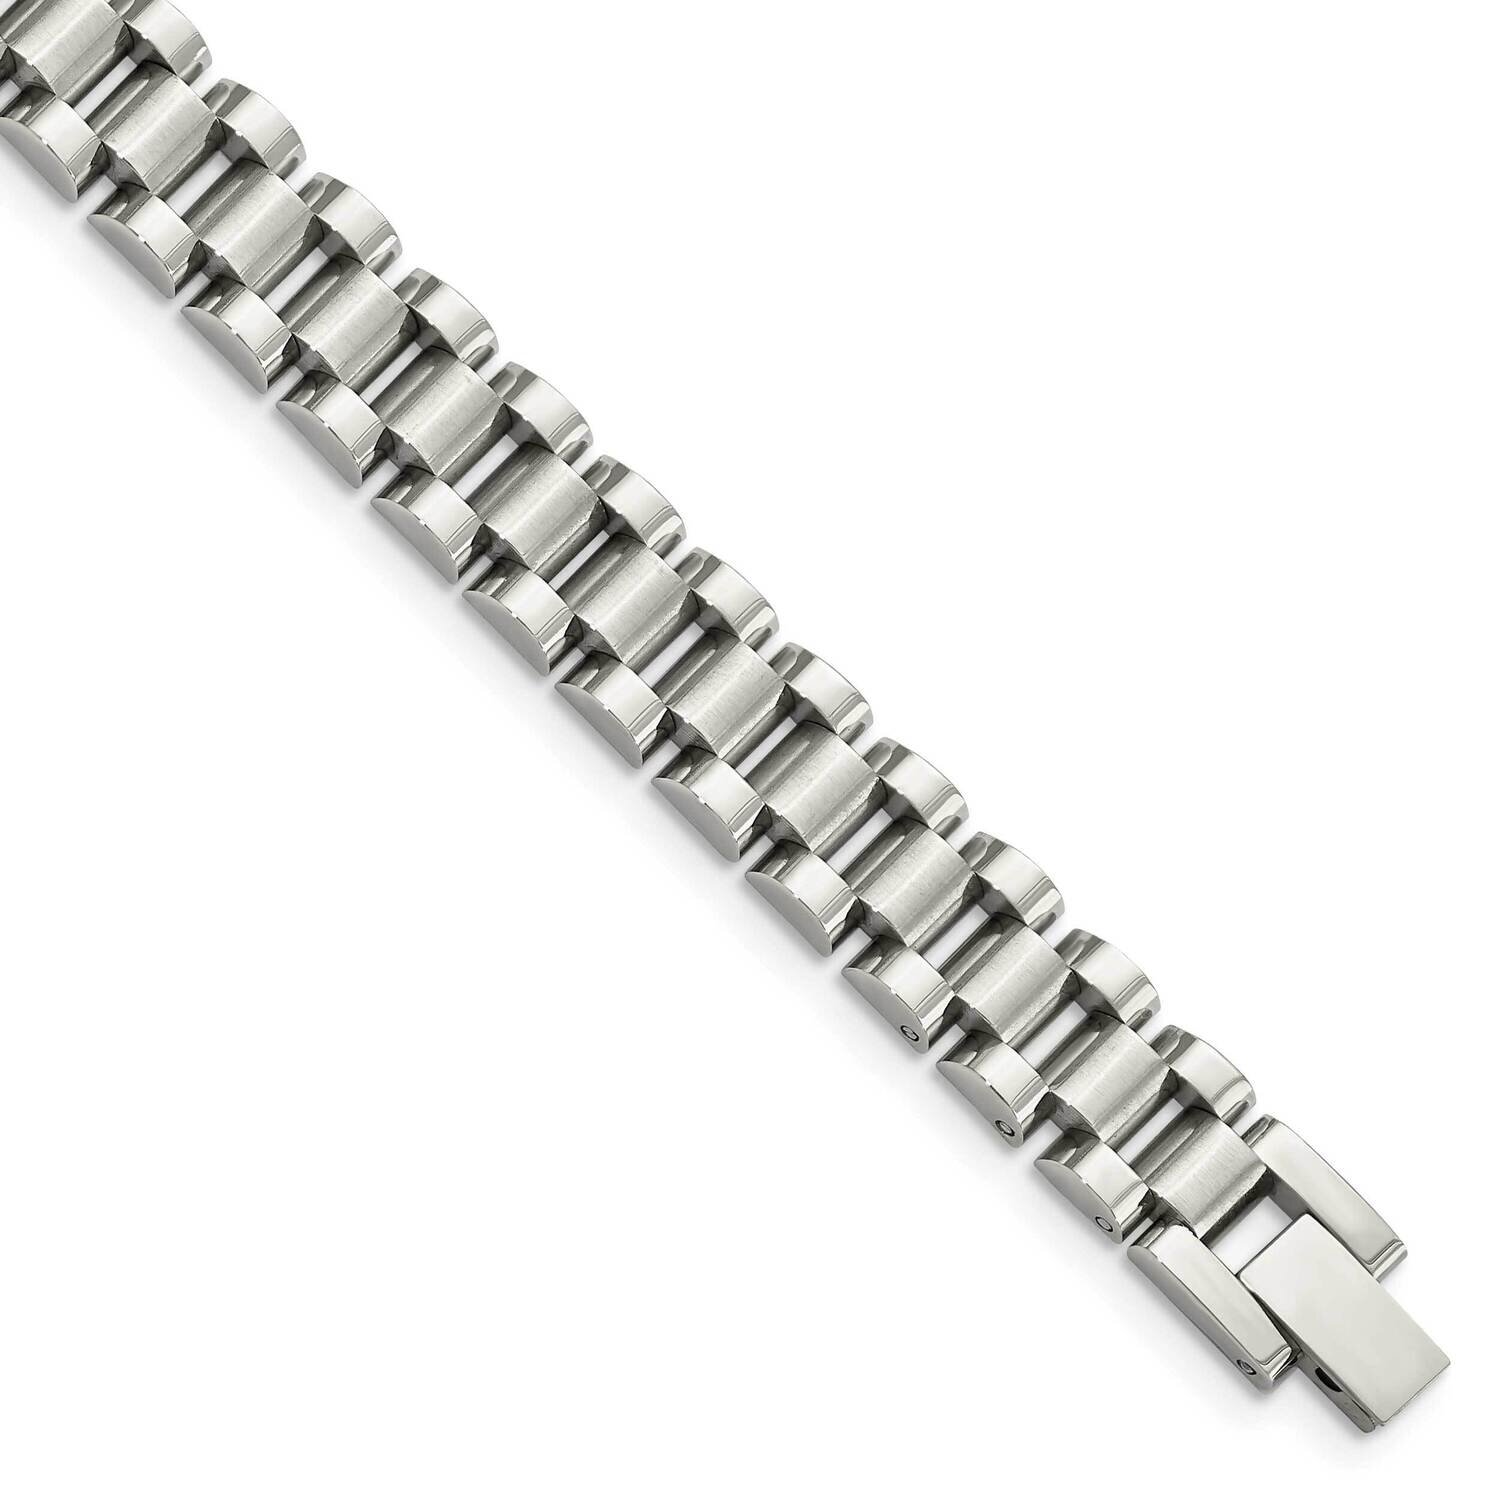 8.5 Inch Bracelet Stainless Steel Brushed and Polished SRB152-8.5